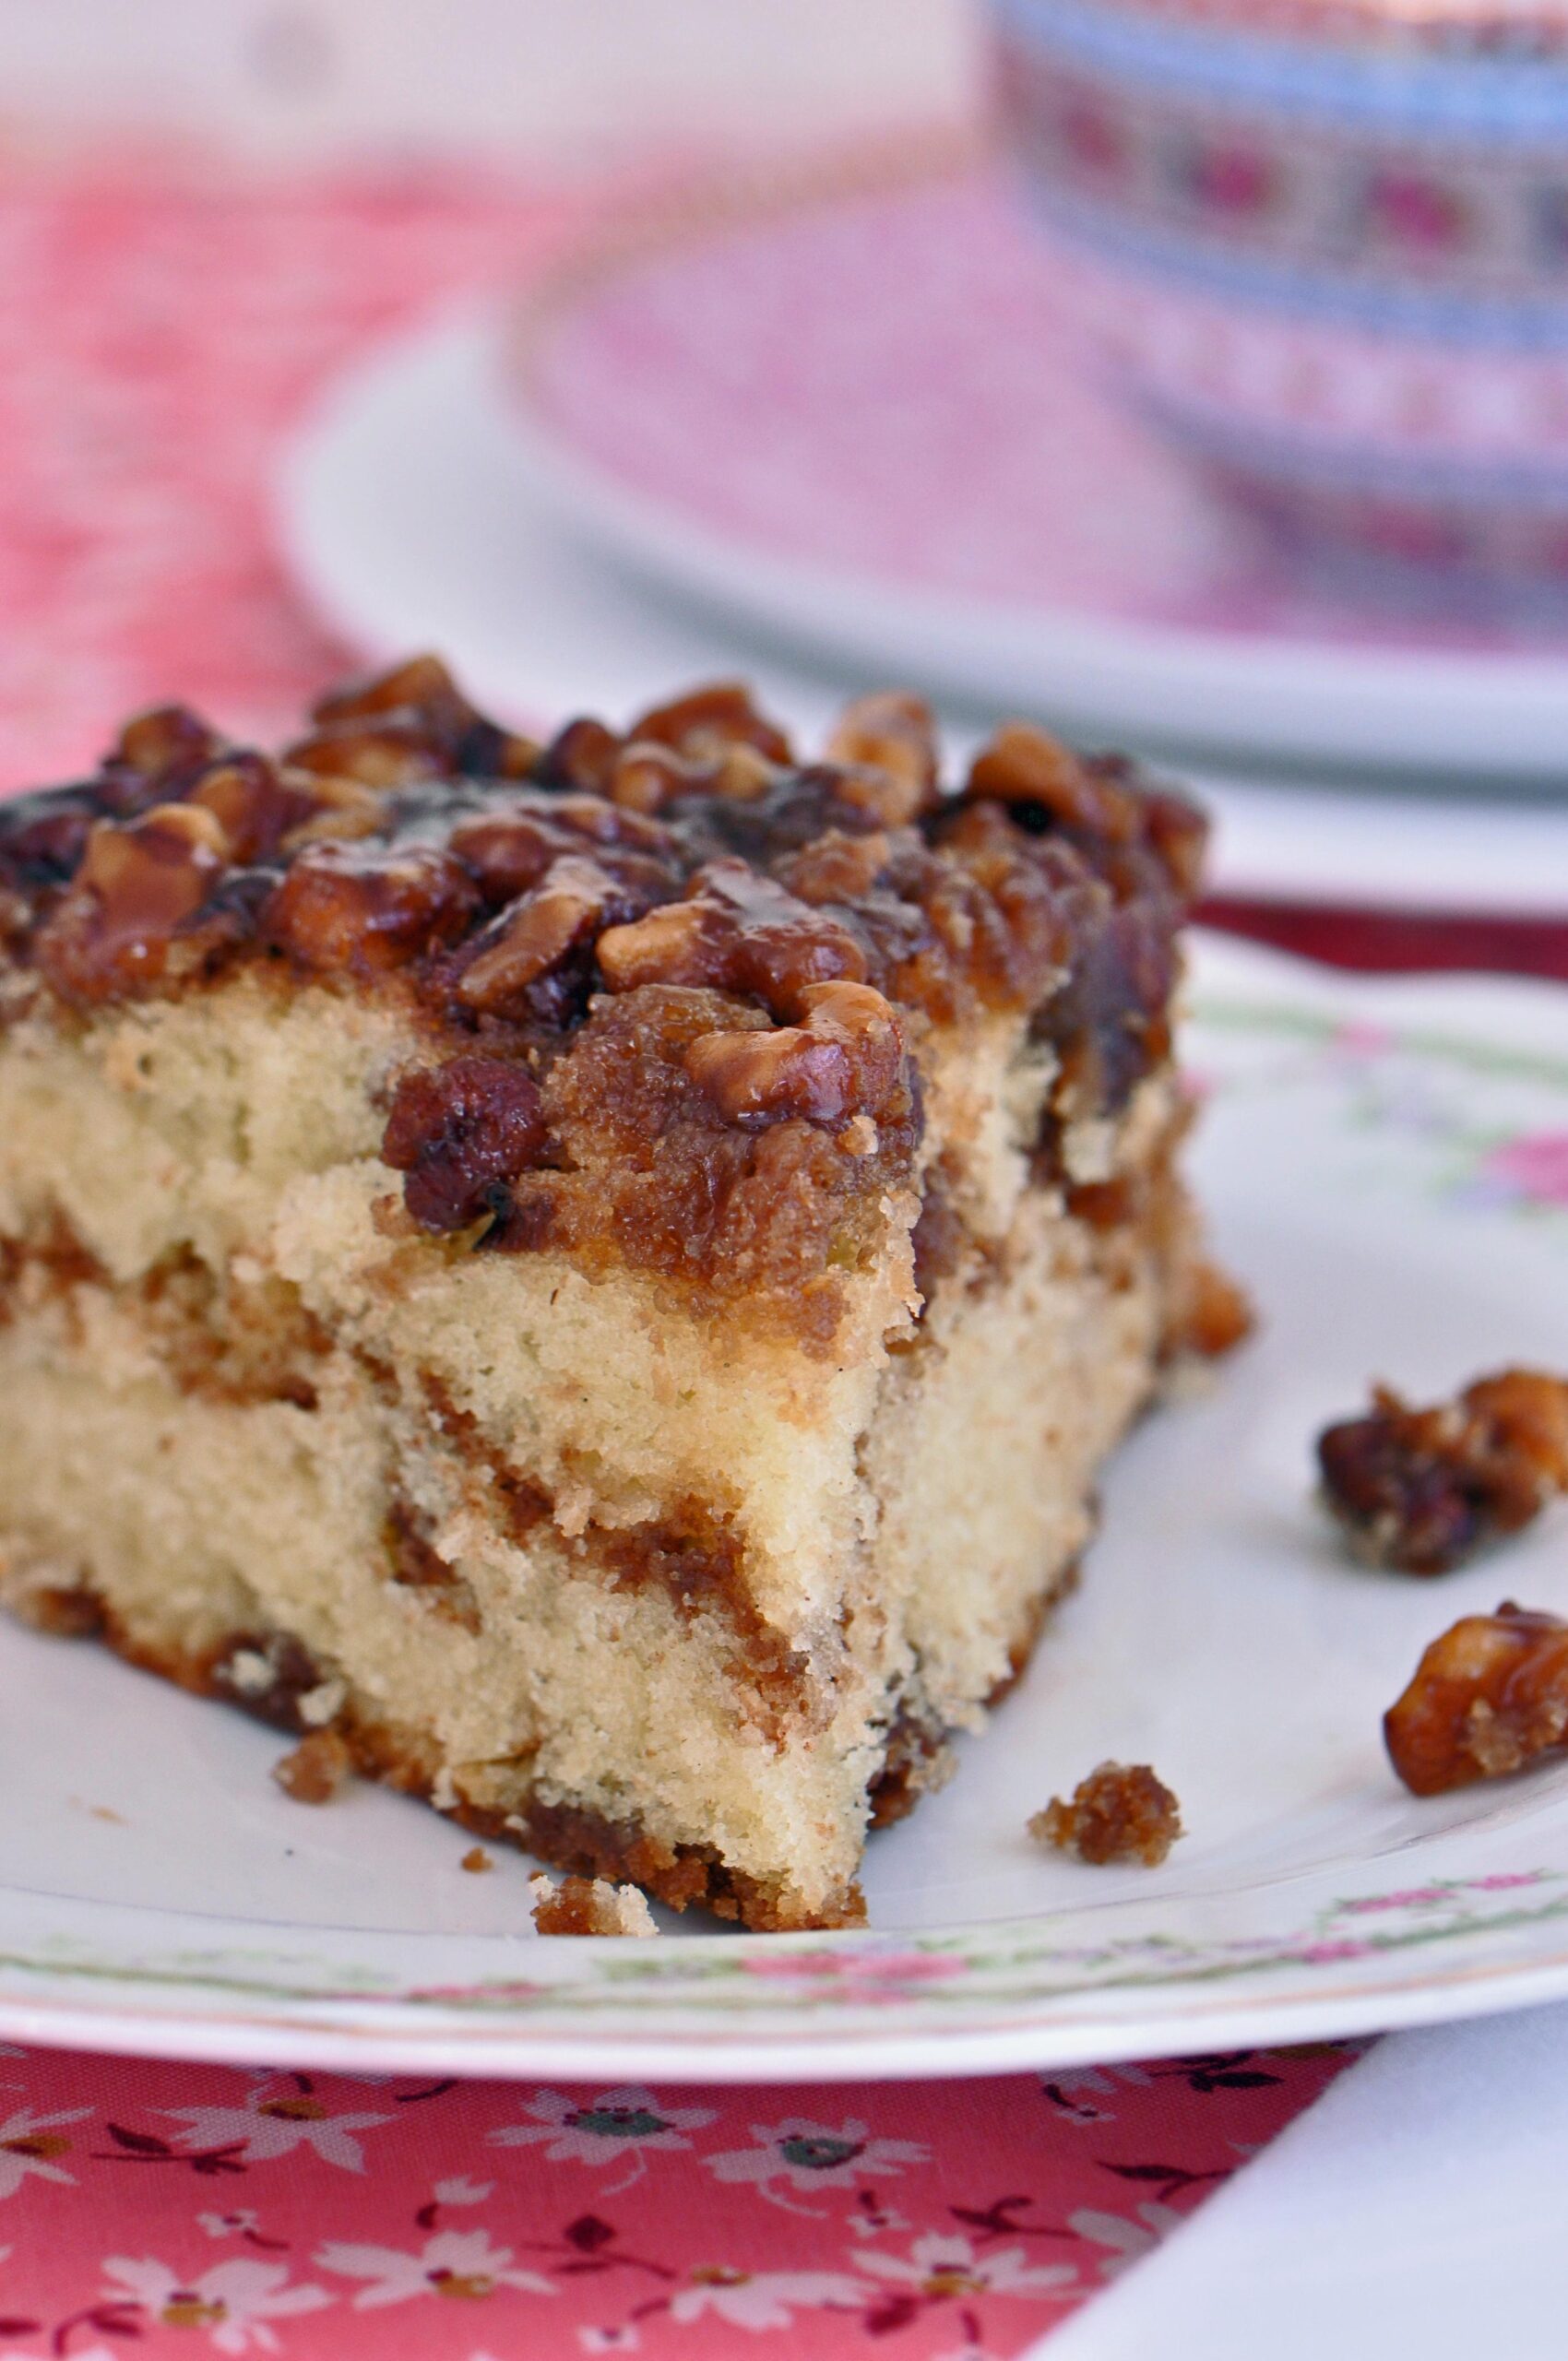  Start your day off right with a slice of this heavenly coffee cake.